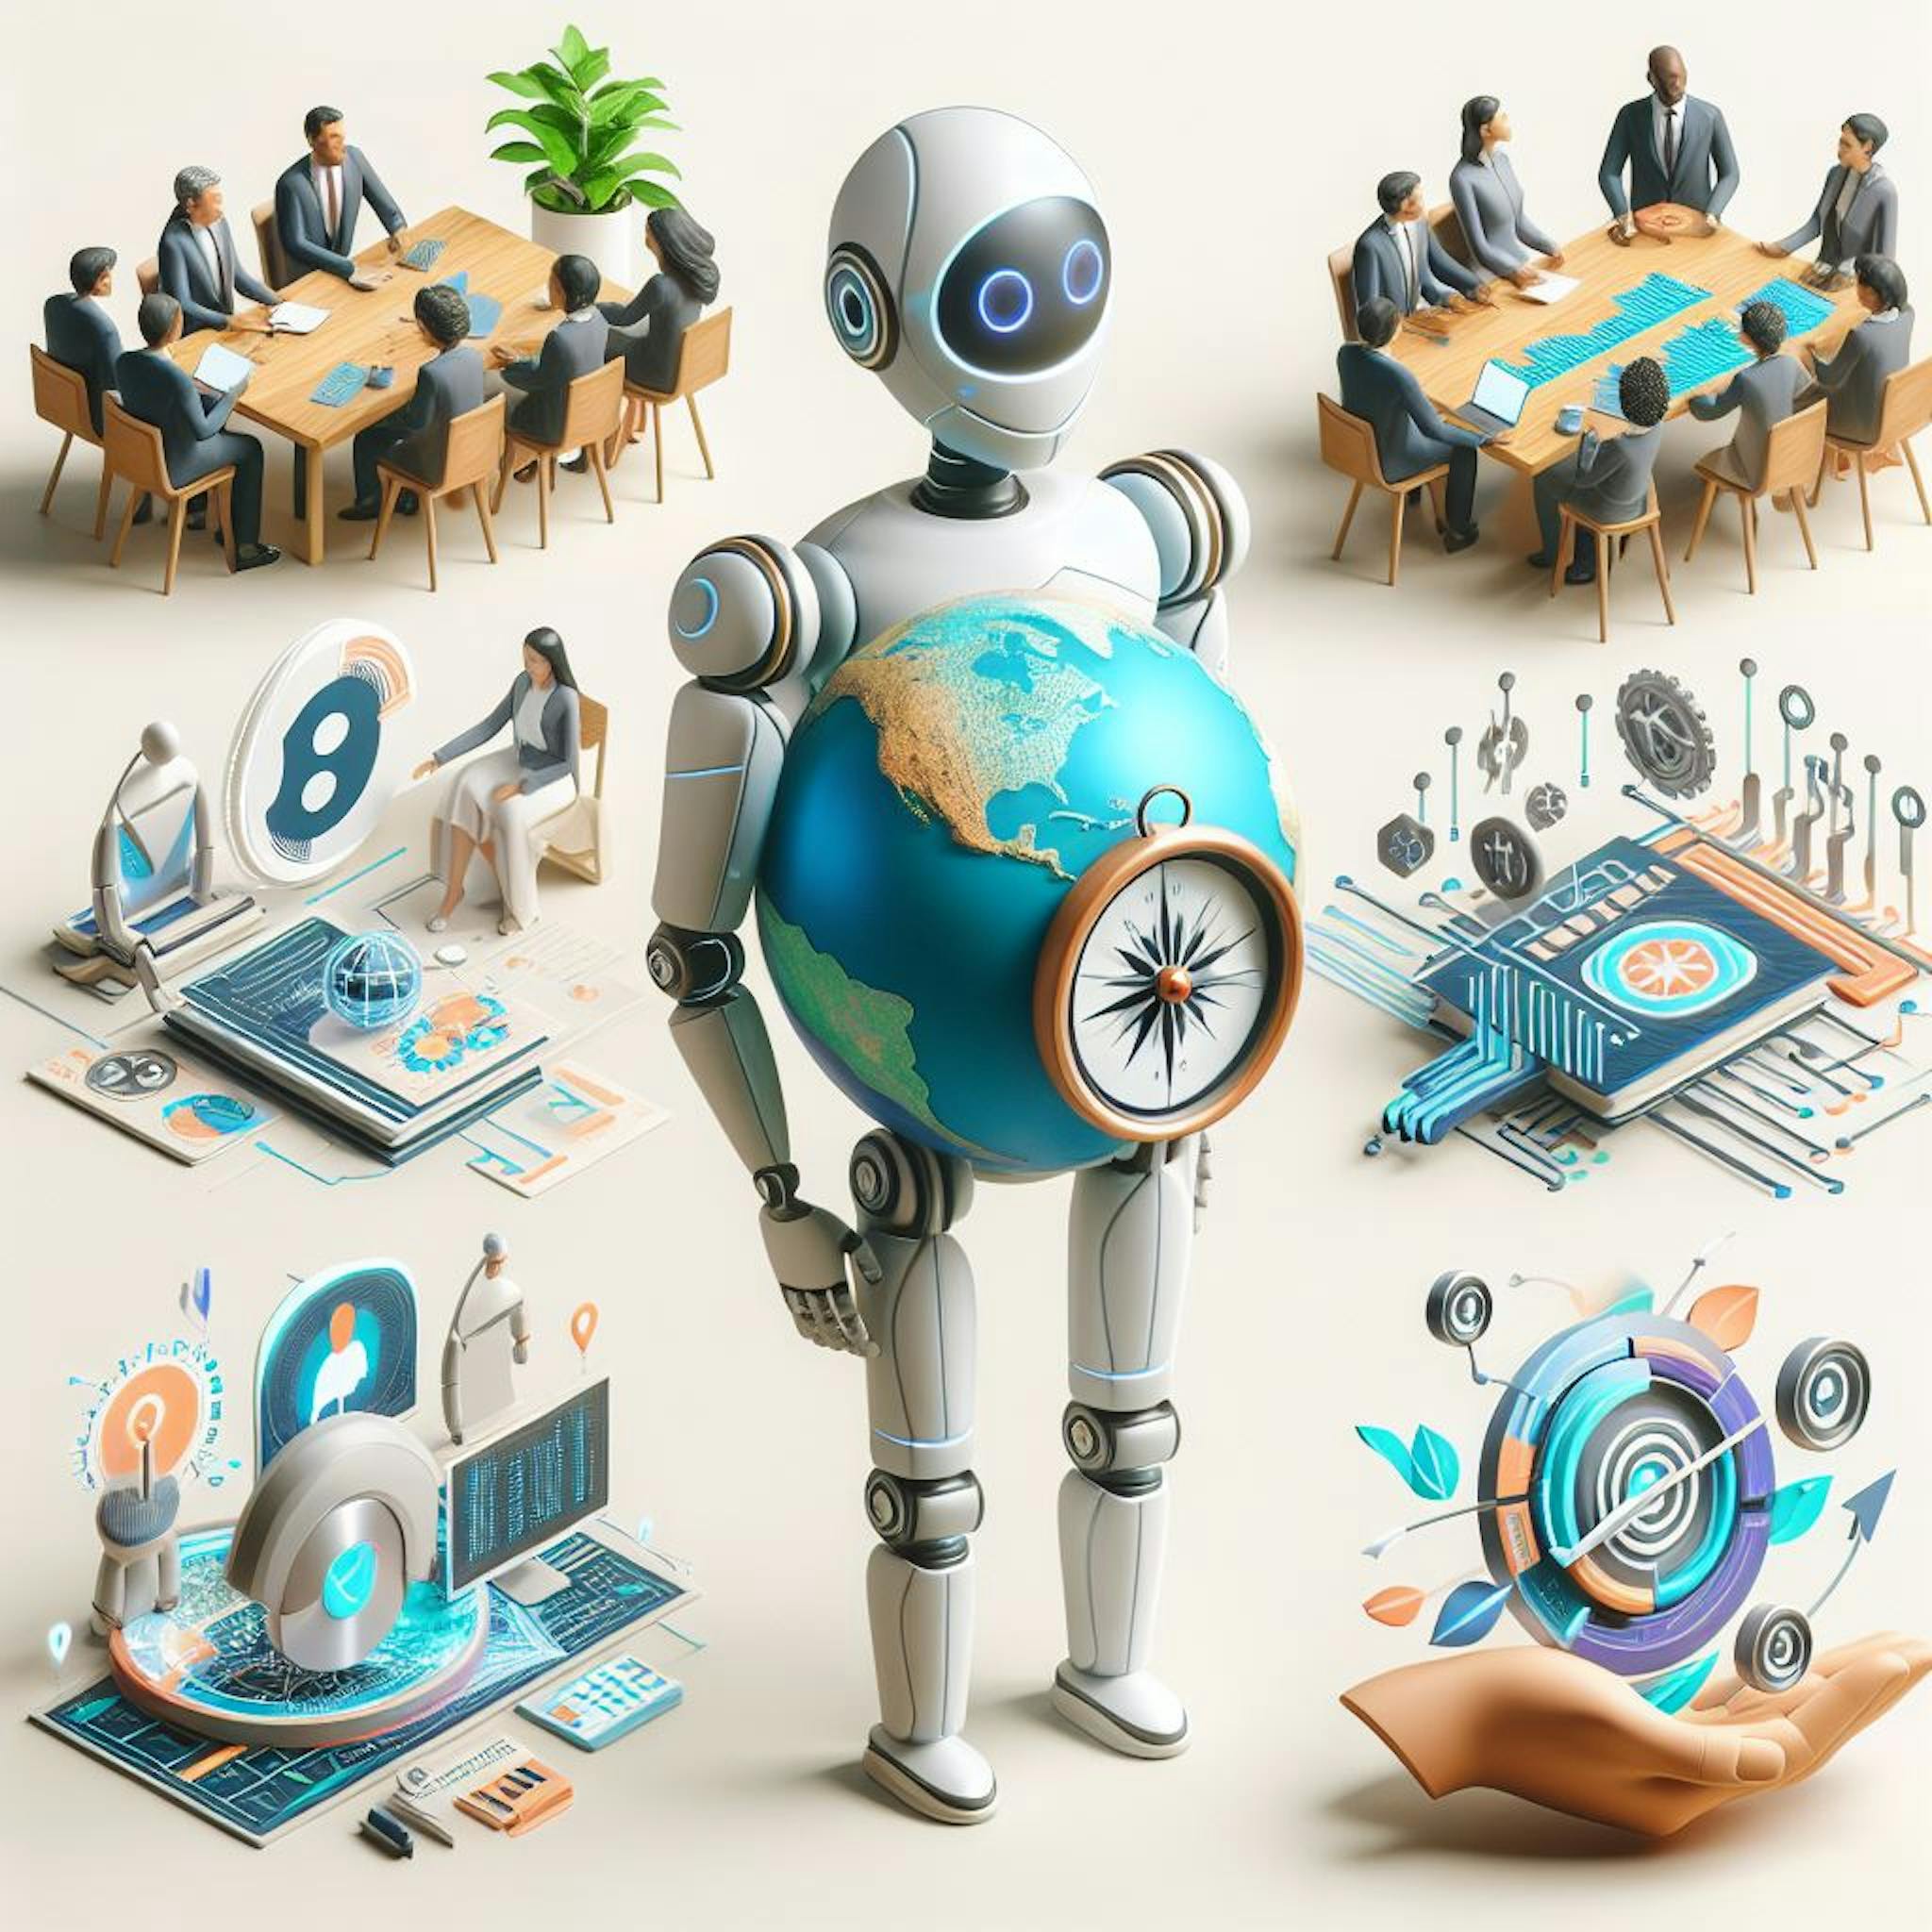 featured image - Strategies for Responsible AI Governance